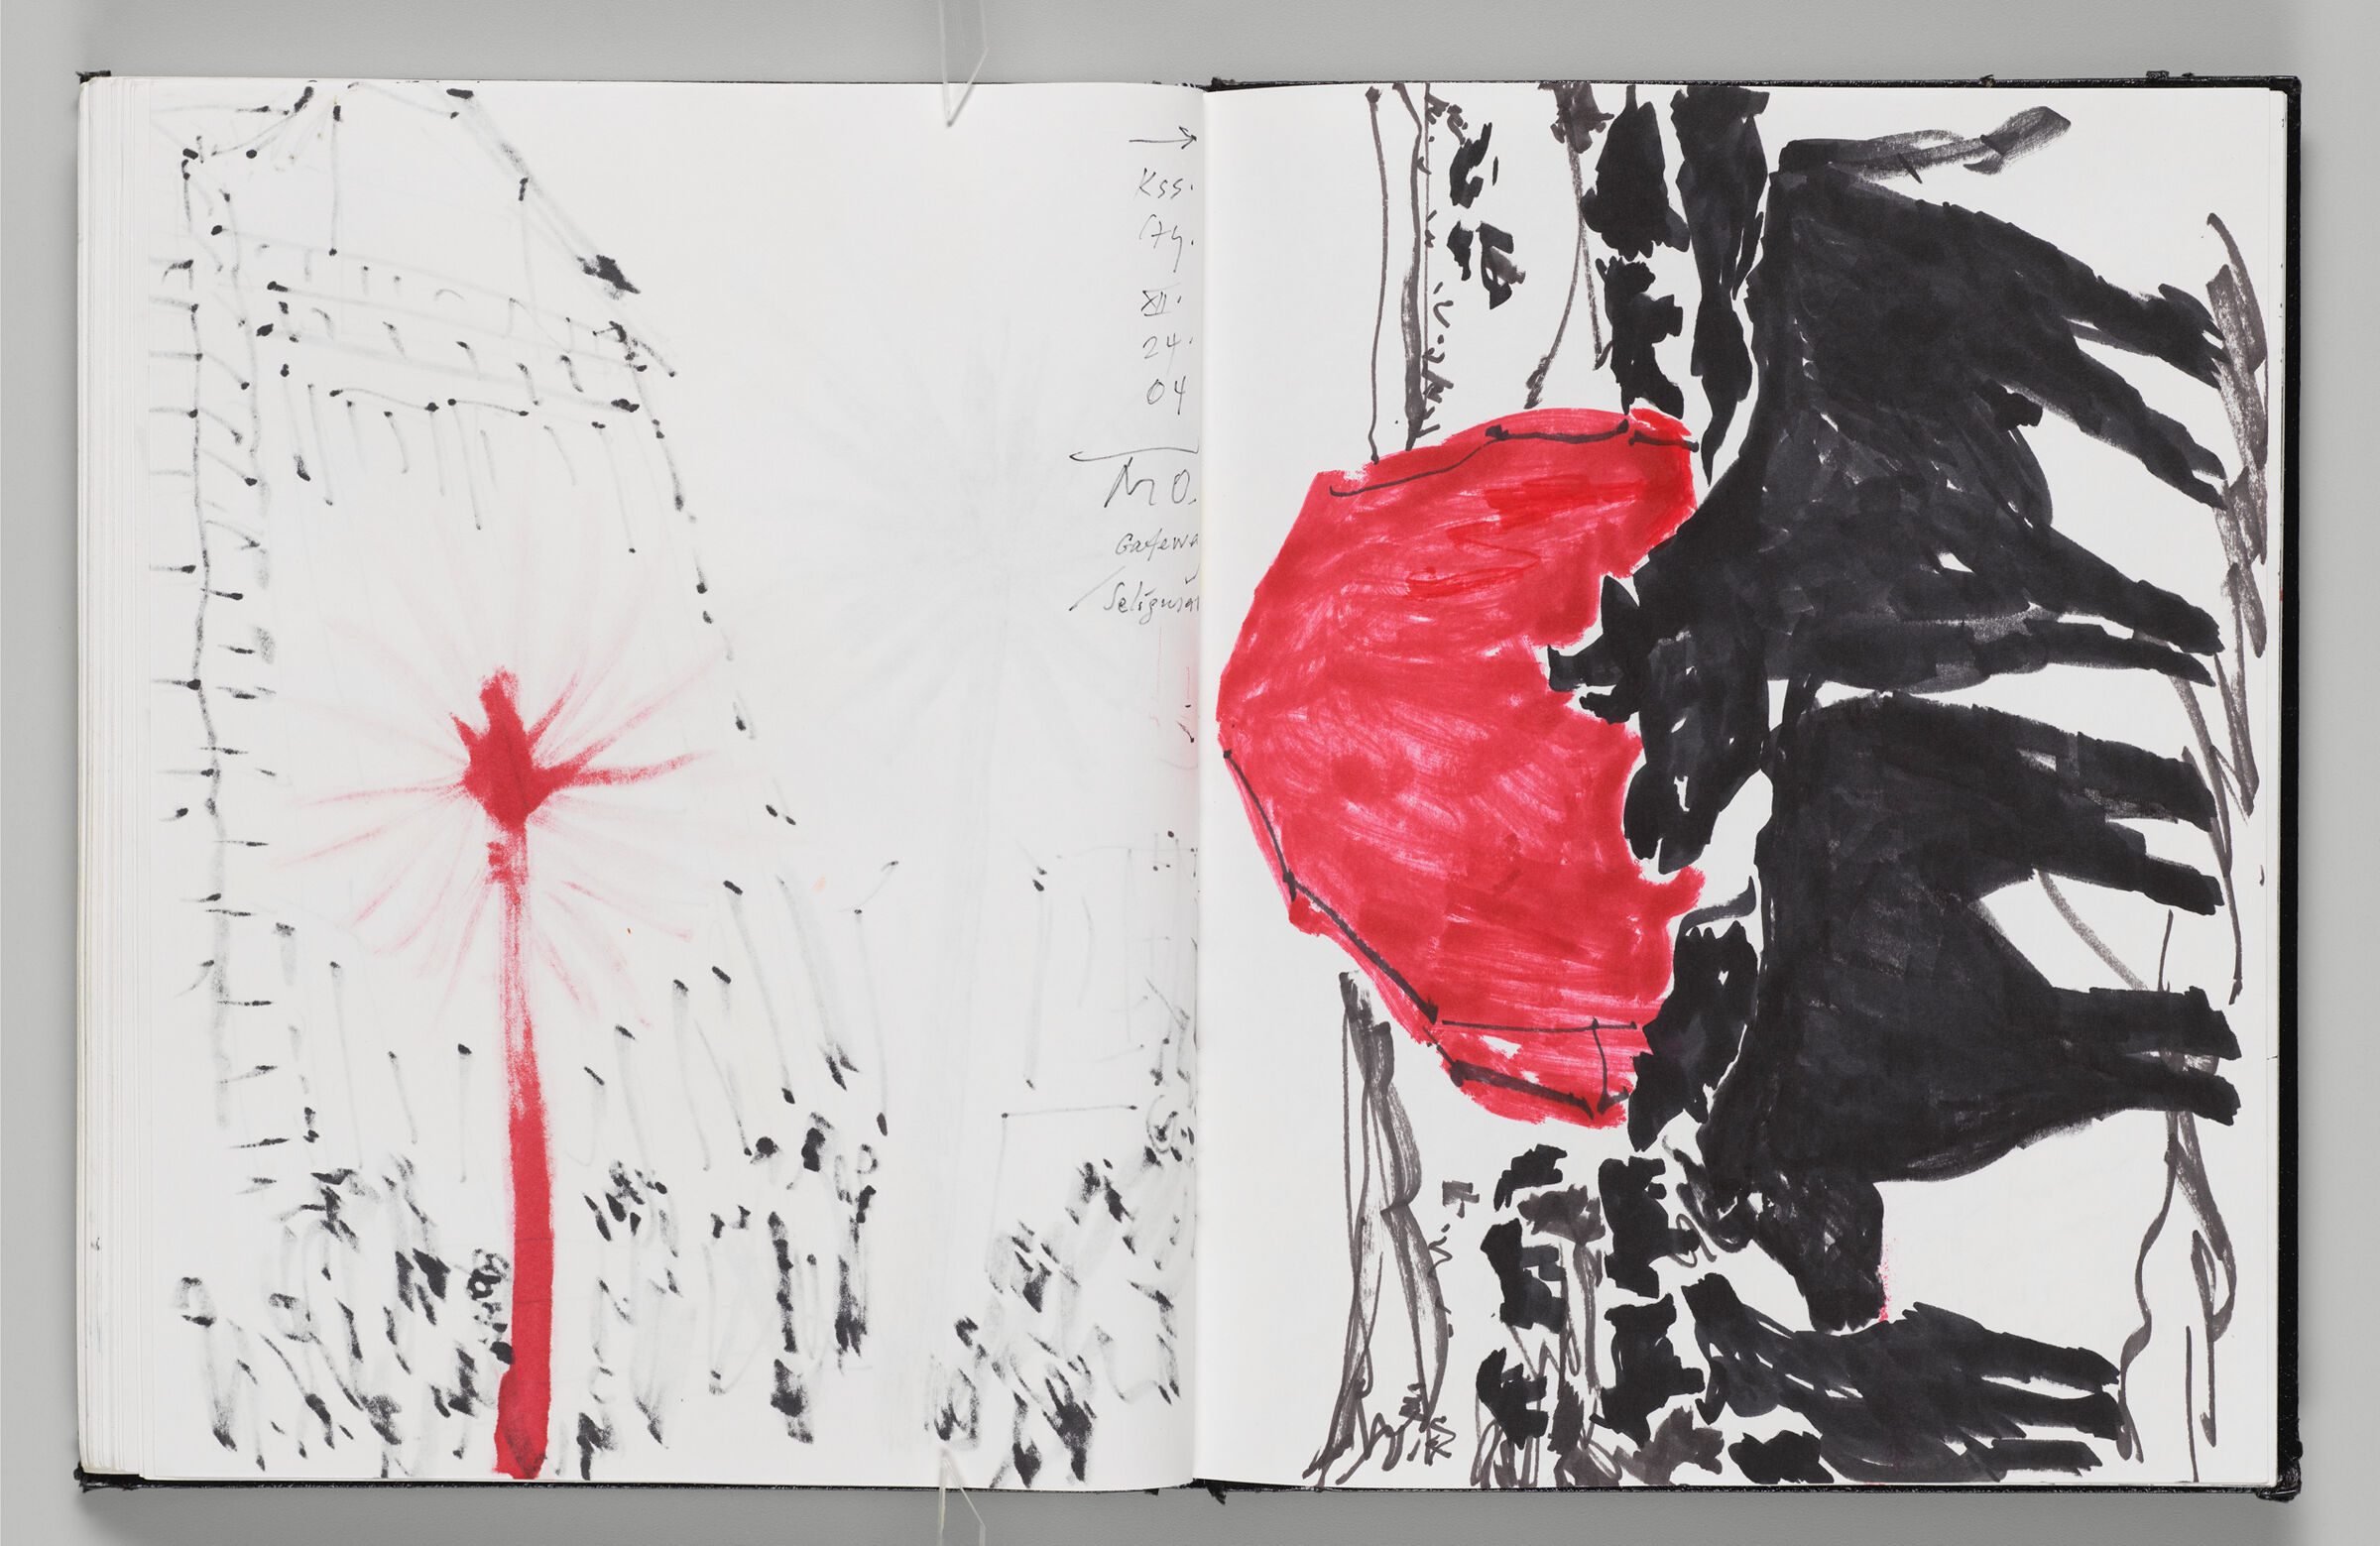 Untitled (Bleed-Through Of Previous Page, Left Page); Untitled (Sketch Of Cows, Right Page)